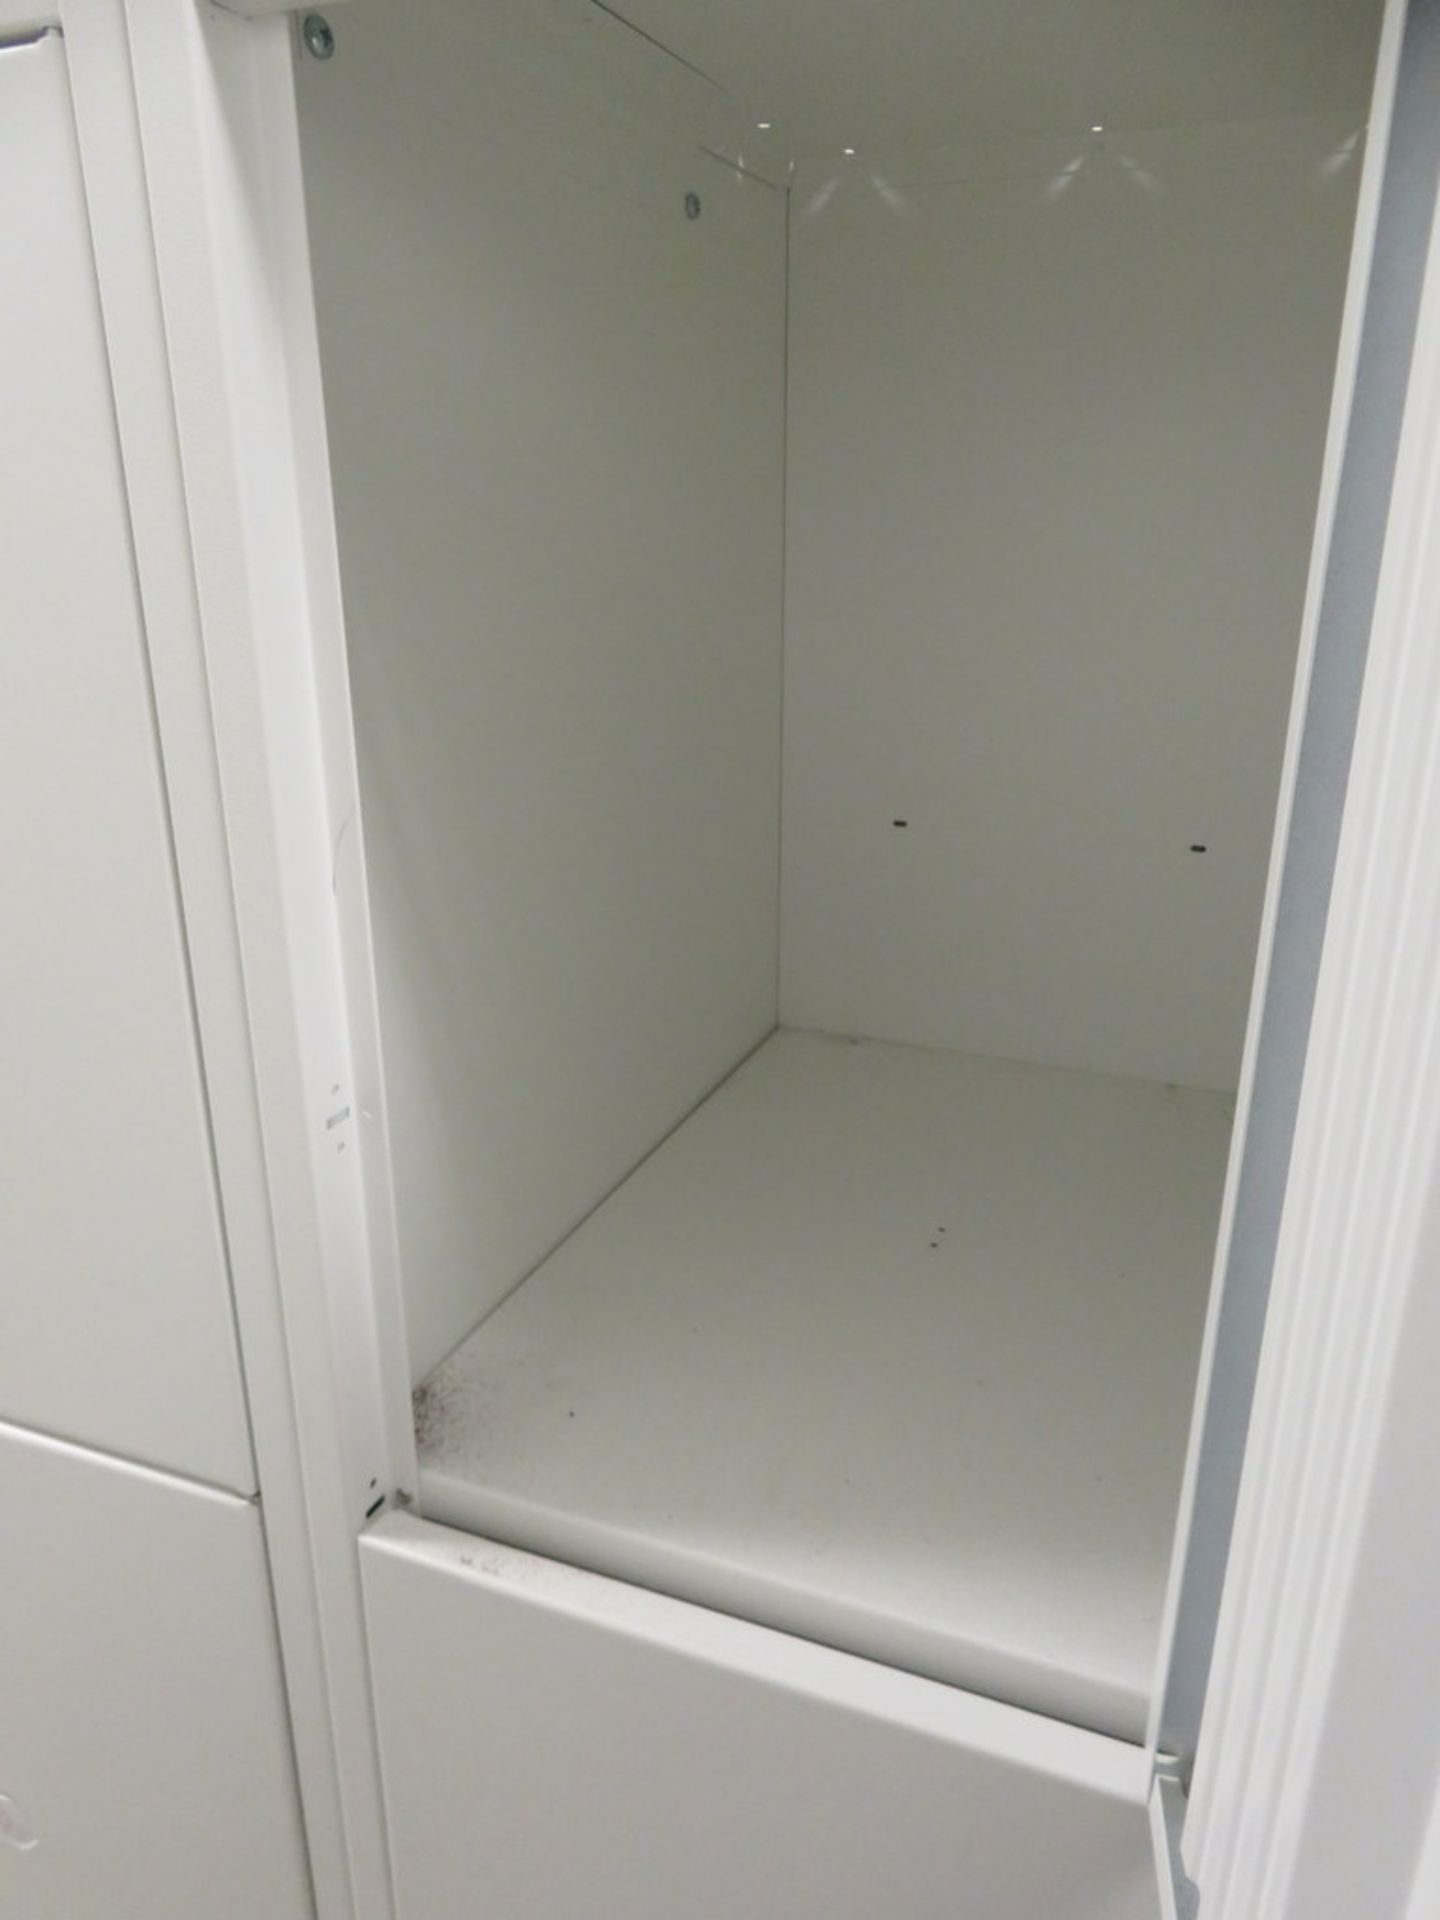 3x Bisley 4 Compartment Personnel Locker. - Image 3 of 3